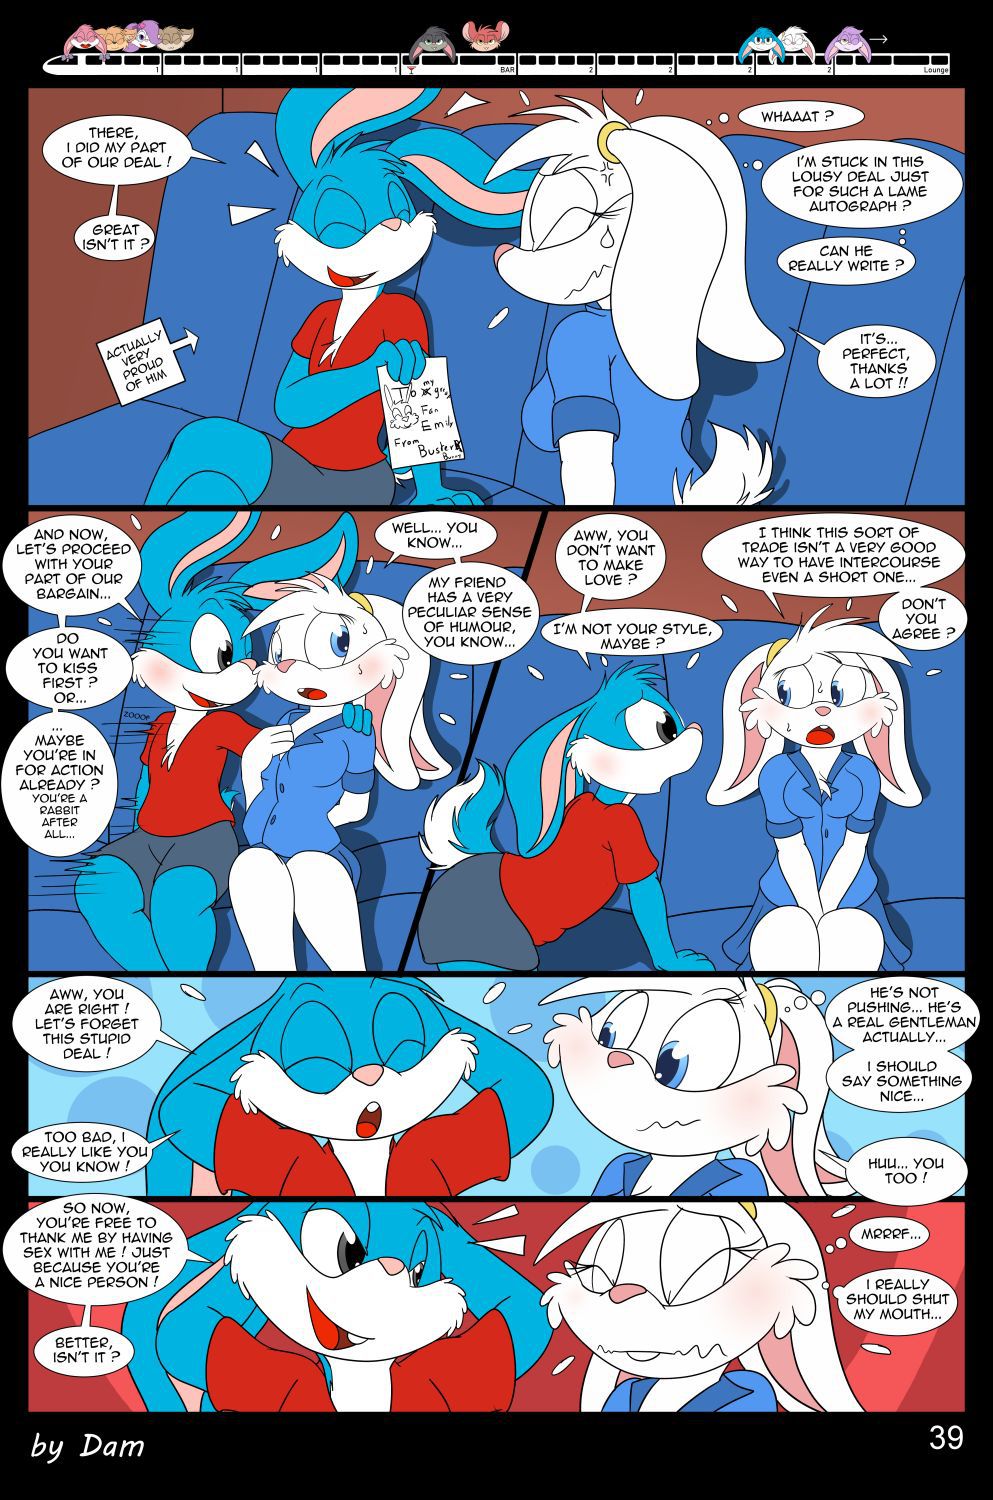 [Dam] Toons on a train [Ongoing] 39